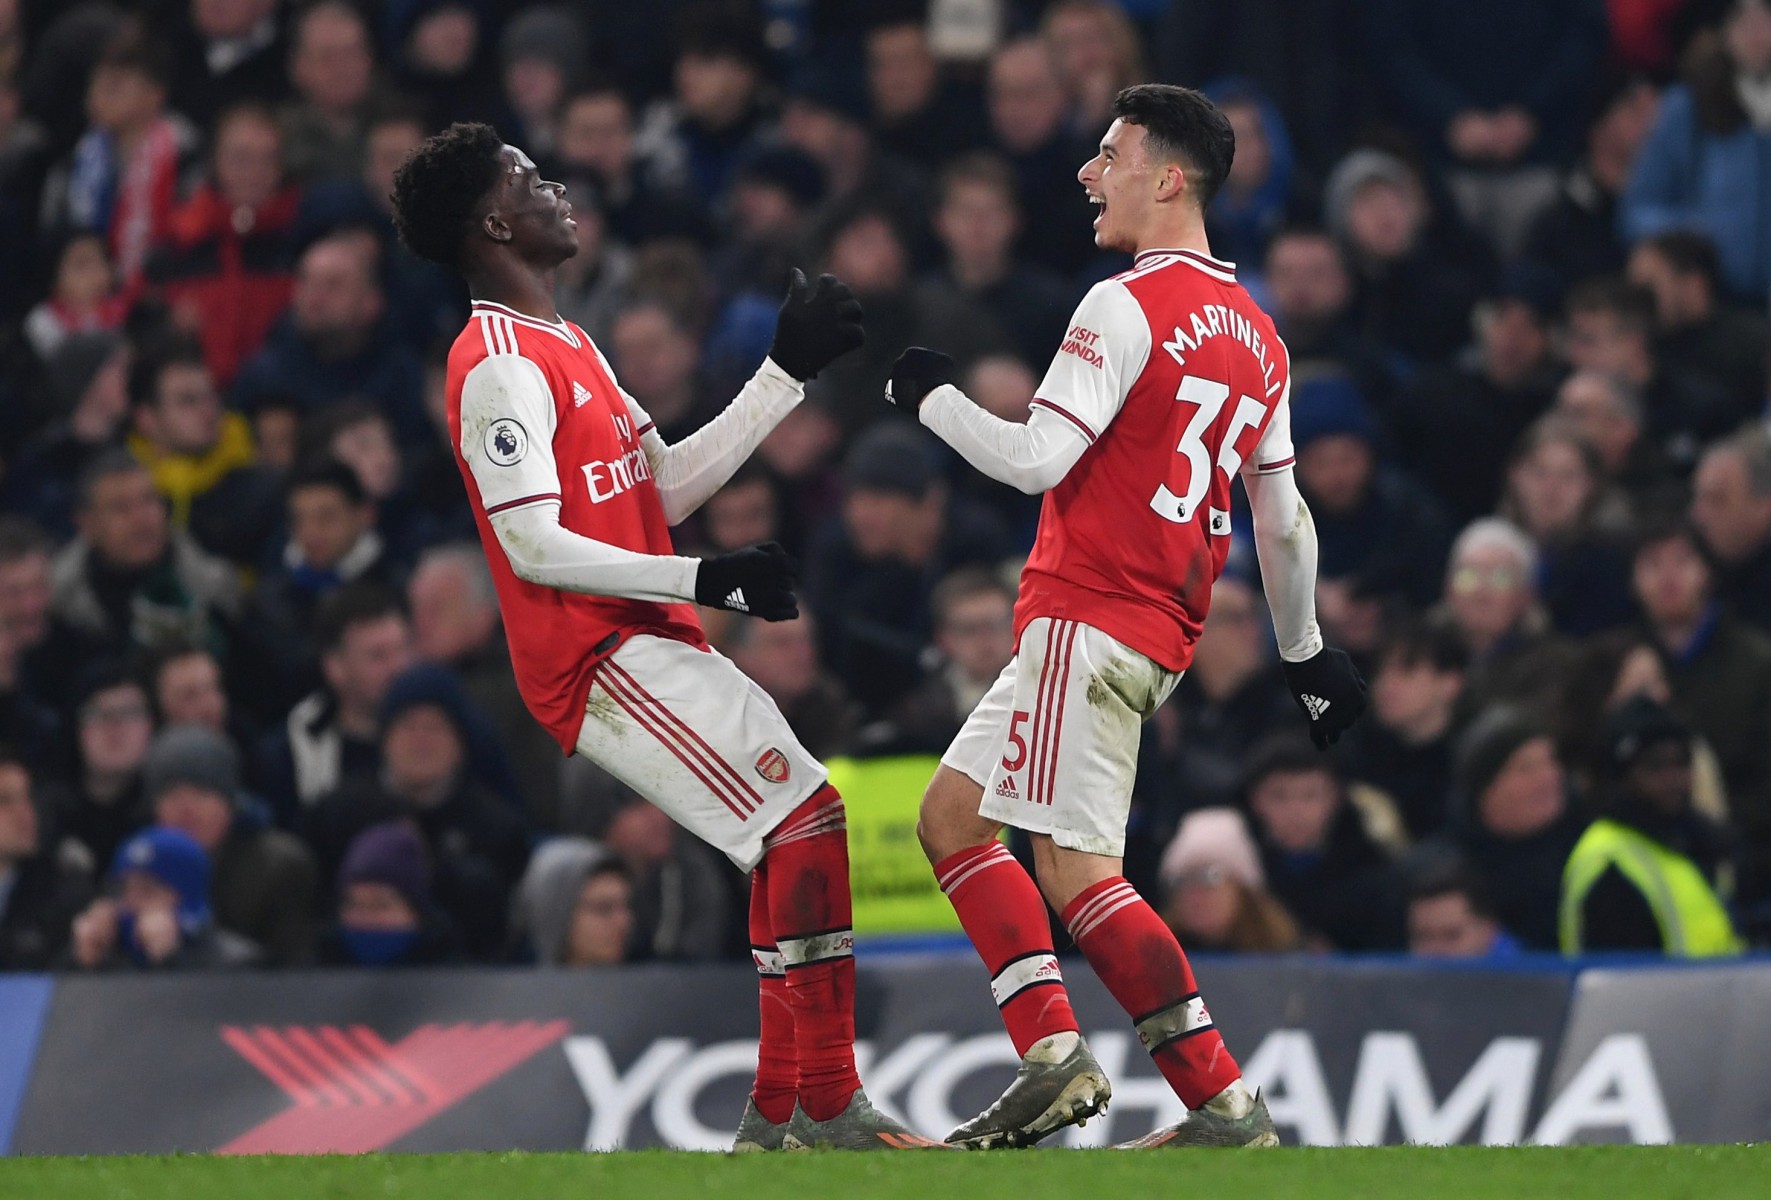 , Premier League best teenage XI features Arsenal star Martinelli and Man Utds Greenwood up front